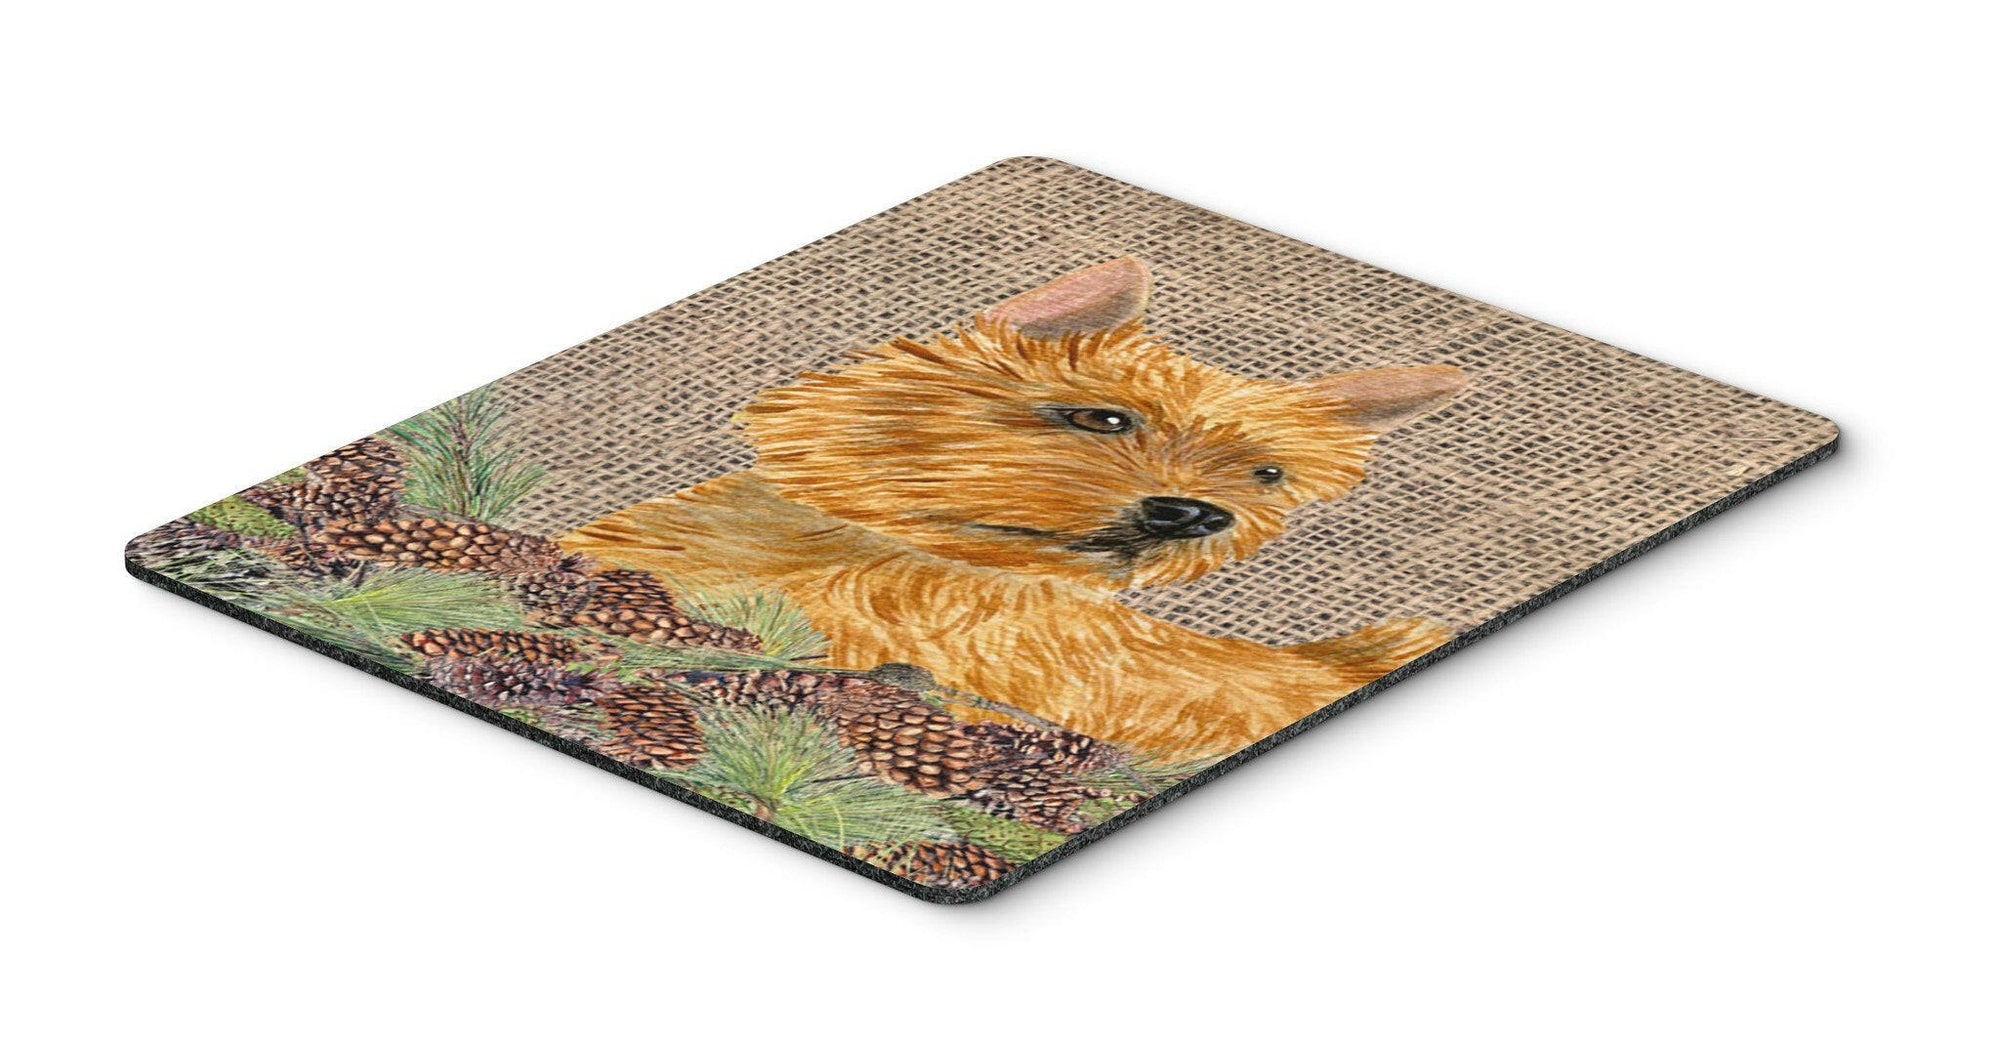 Norwich Terrier Mouse Pad, Hot Pad or Trivet by Caroline's Treasures